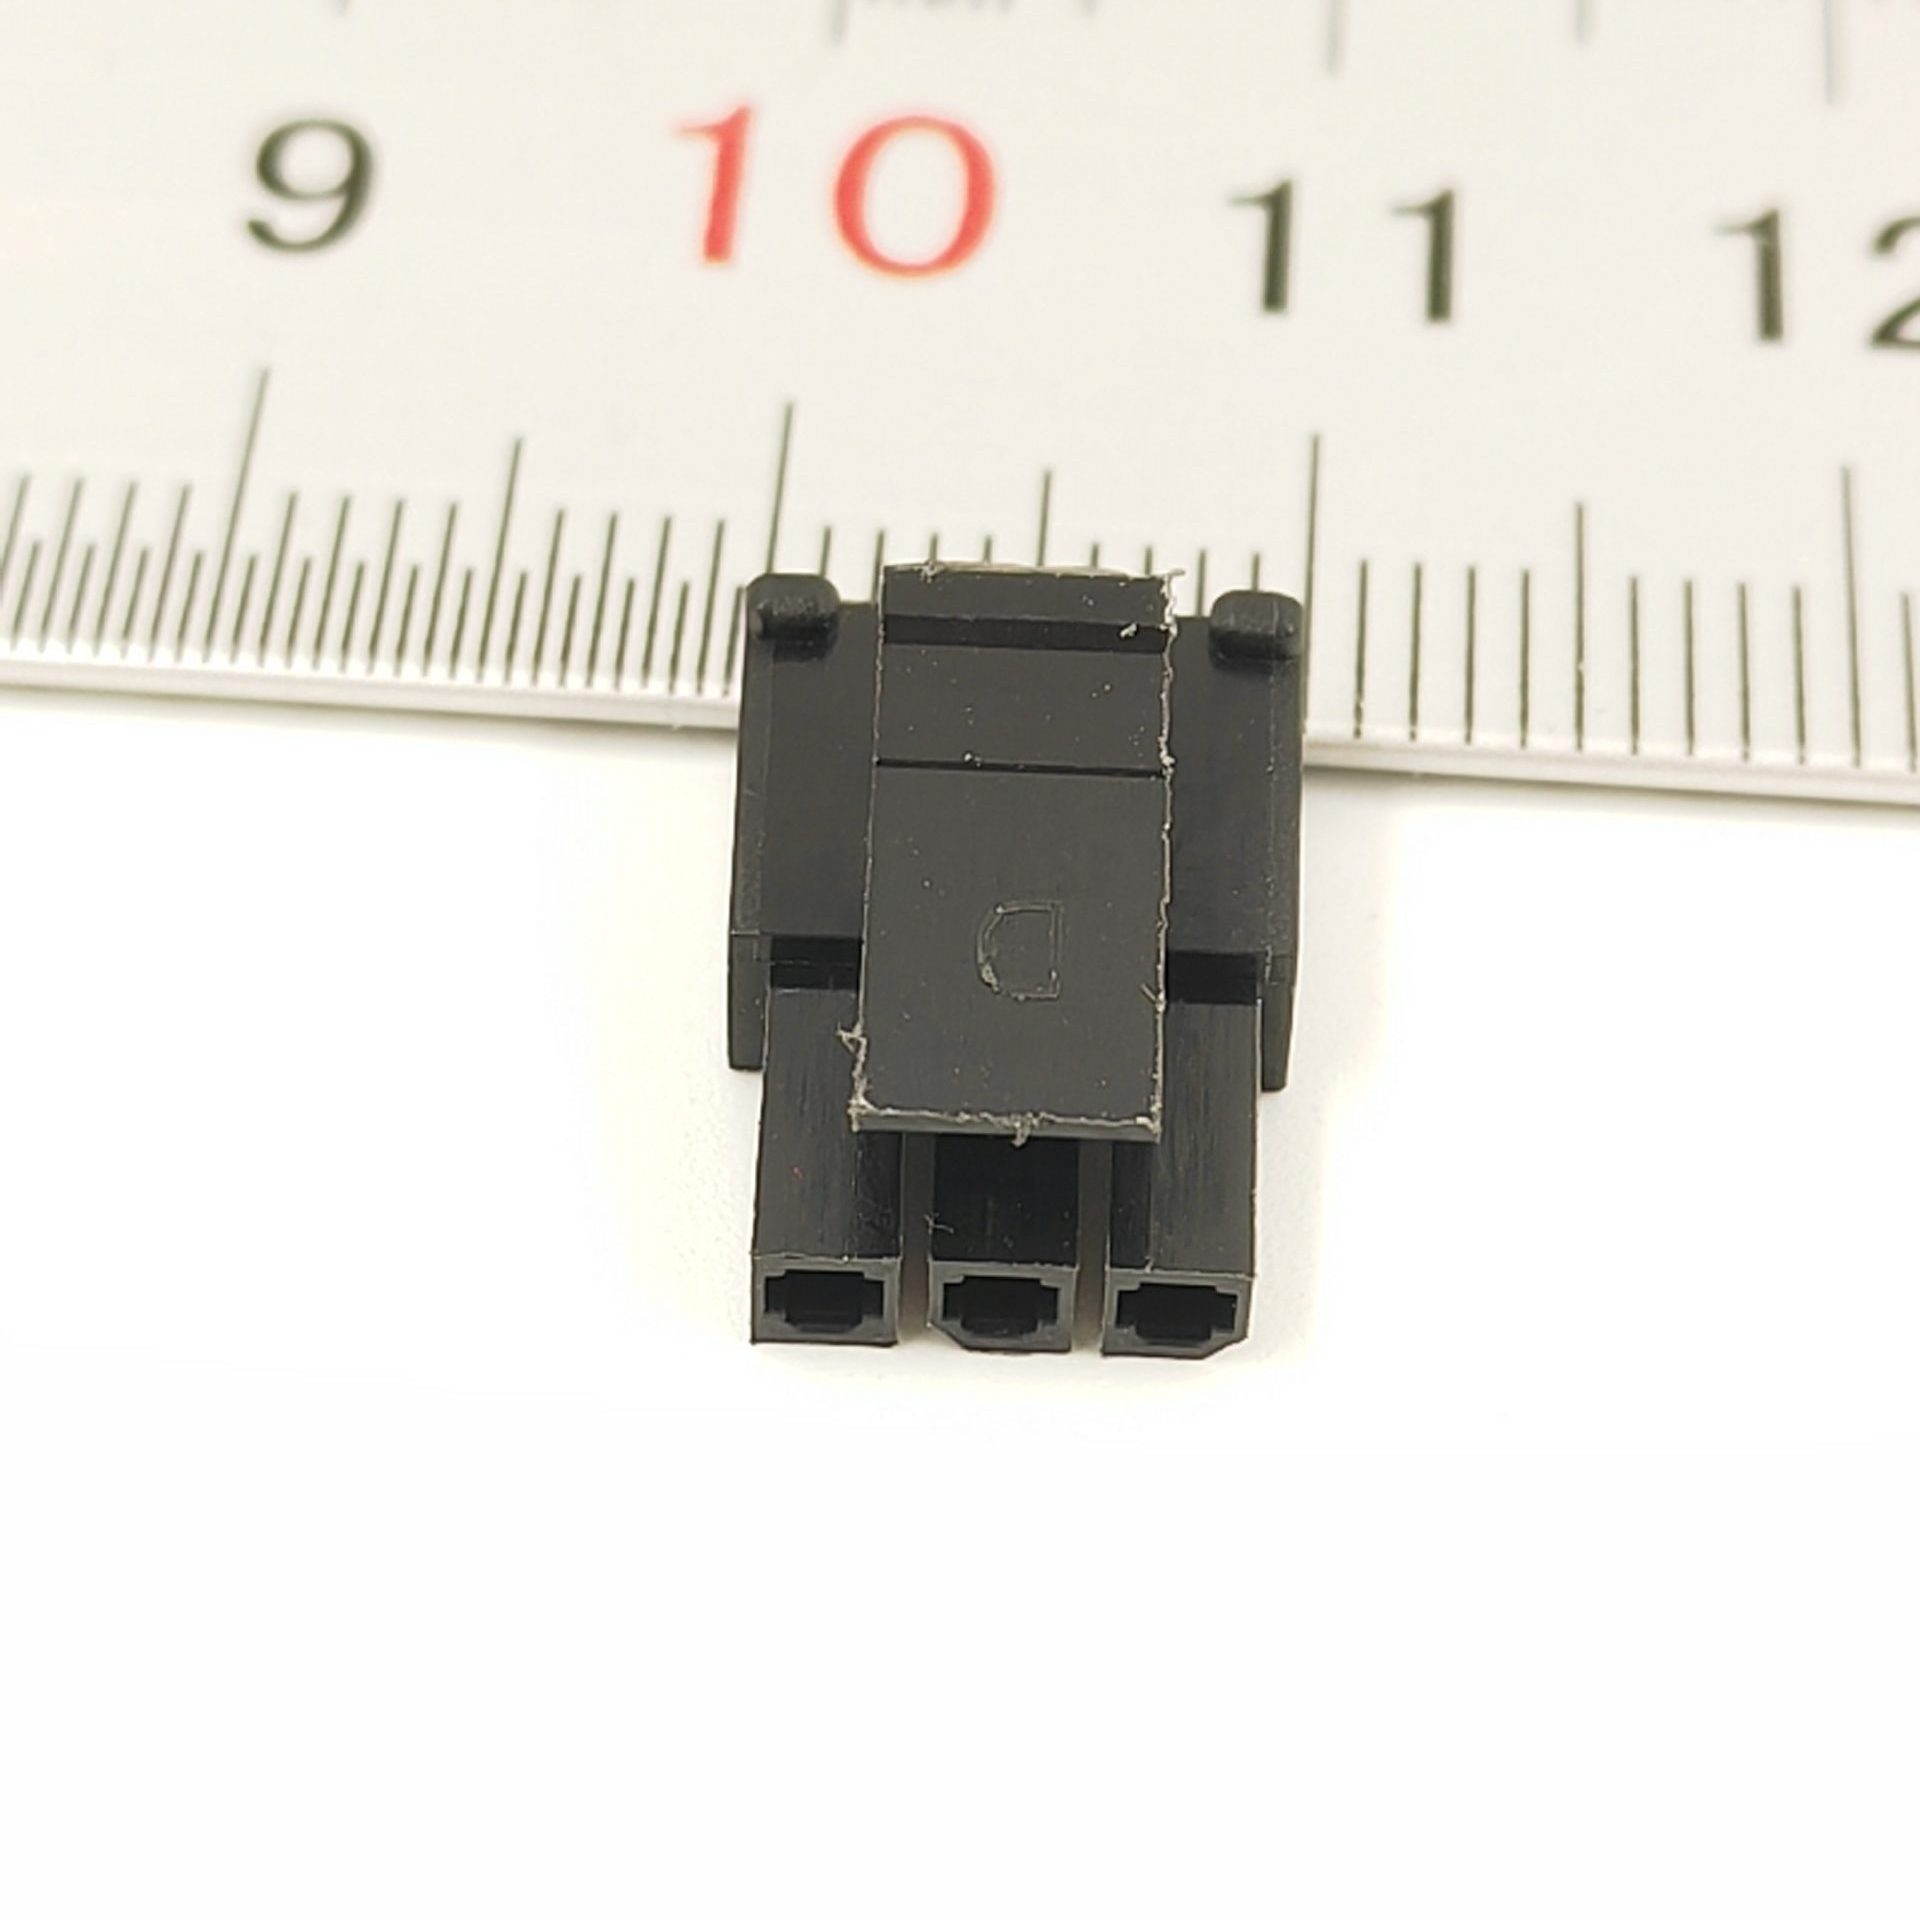 3.0mm pitch single row 3P Wire to Board Connector for Micro-Fit 3.0 43645 0436450310 0436450308 0436450300